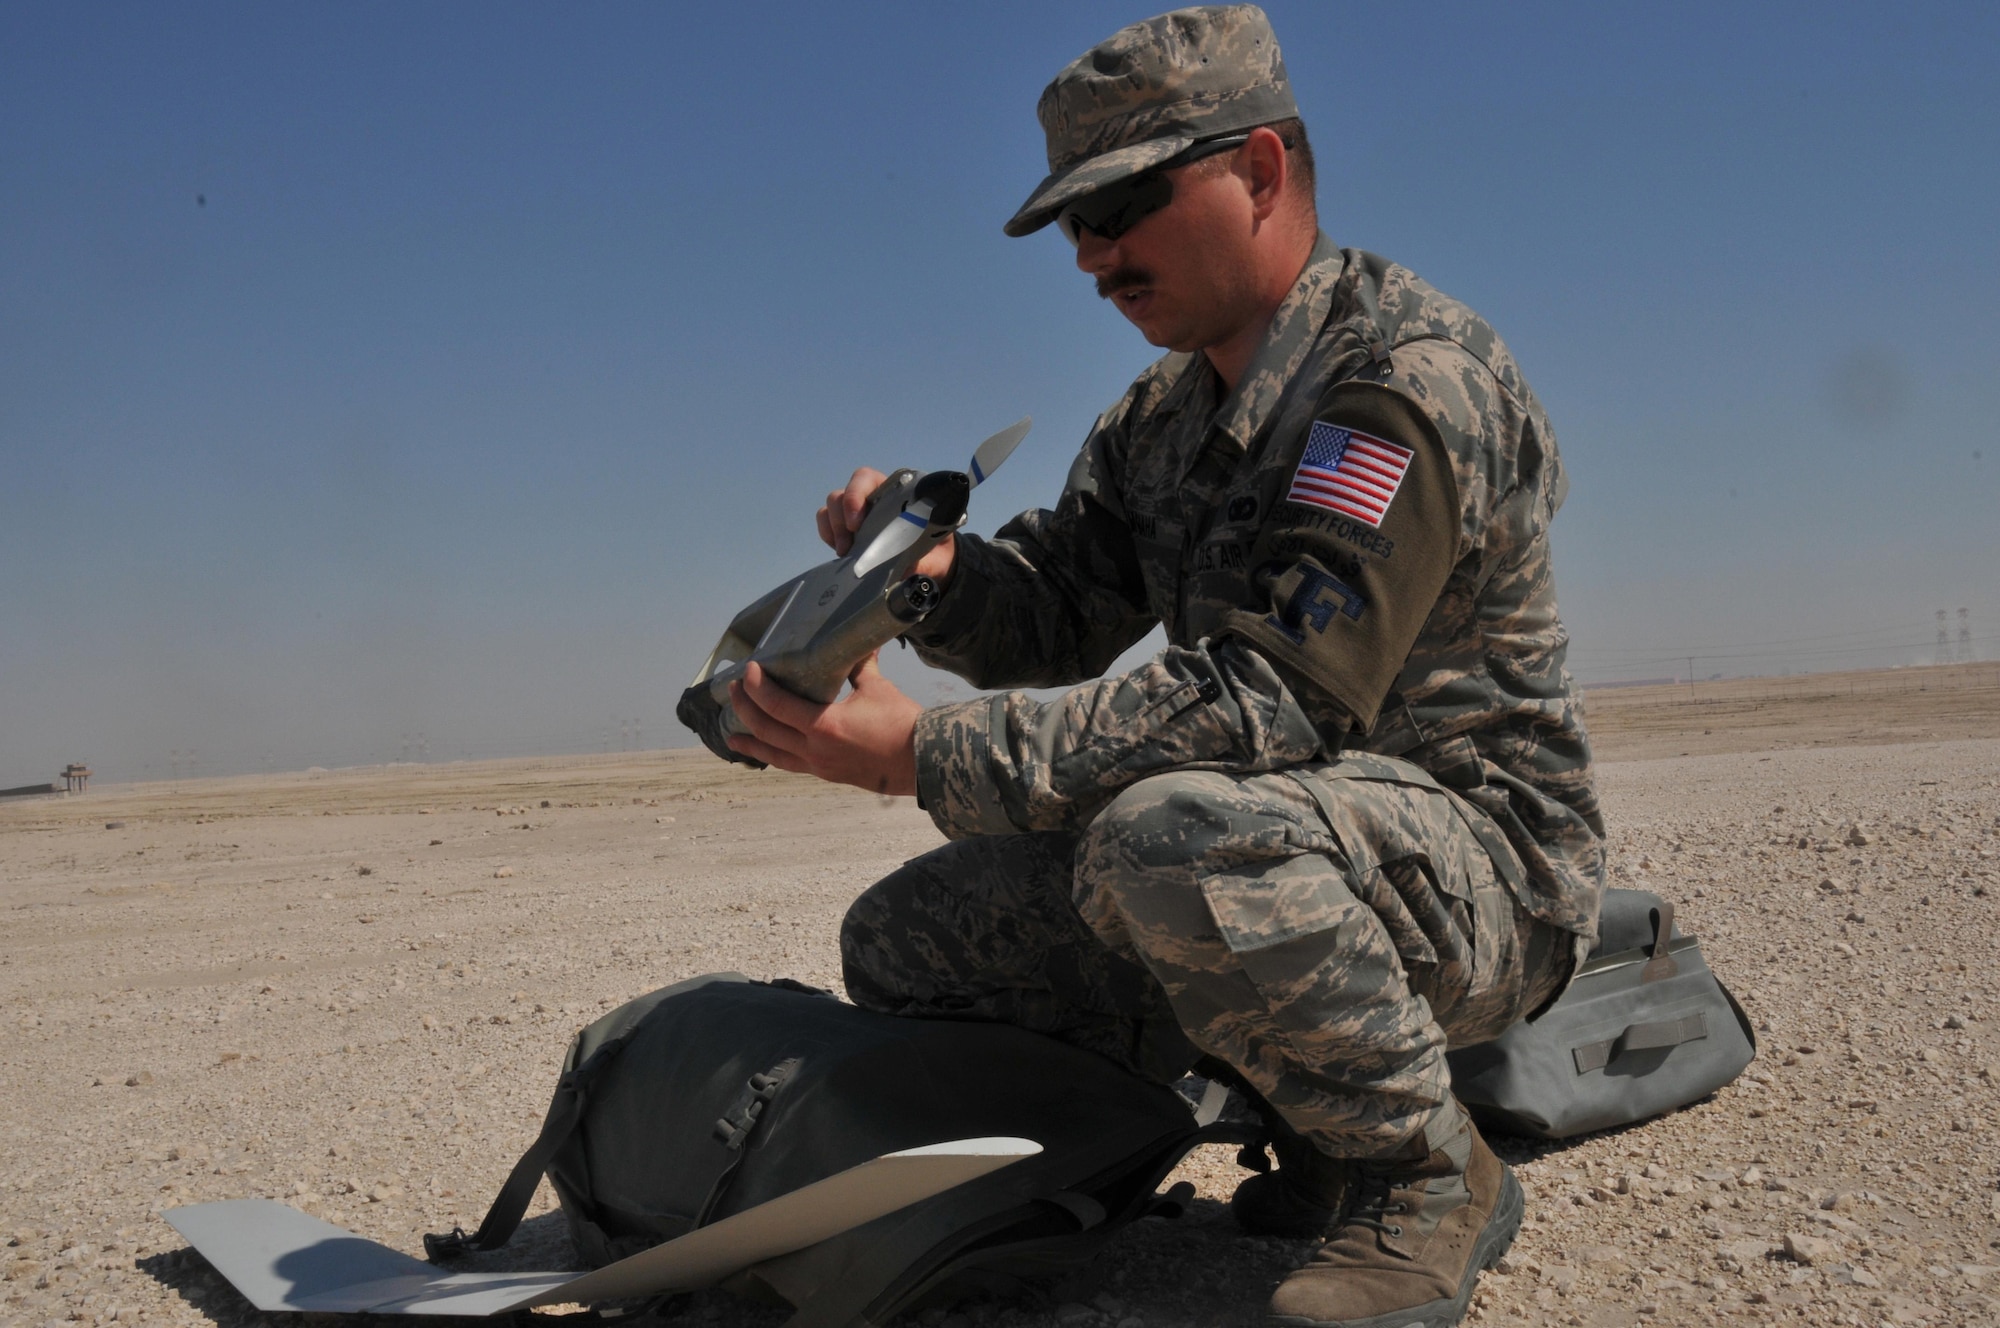 Senior Airman James McGaha, 379th Expeditionary Security Force Squadron patrolman, puts together a Raven B Digital Data Link drone, a small unmanned aircraft or drone, Feb. 19 at Al Udeid Air Base, Qatar. McGaha is a member of a two person team who operate the Raven B drone at AUAB. He is deployed from Yokota Air Base, Japan, and has been a patrolman for three years. (U.S. Air Force photo by Tech. Sgt. Terrica Y. Jones/Released) 